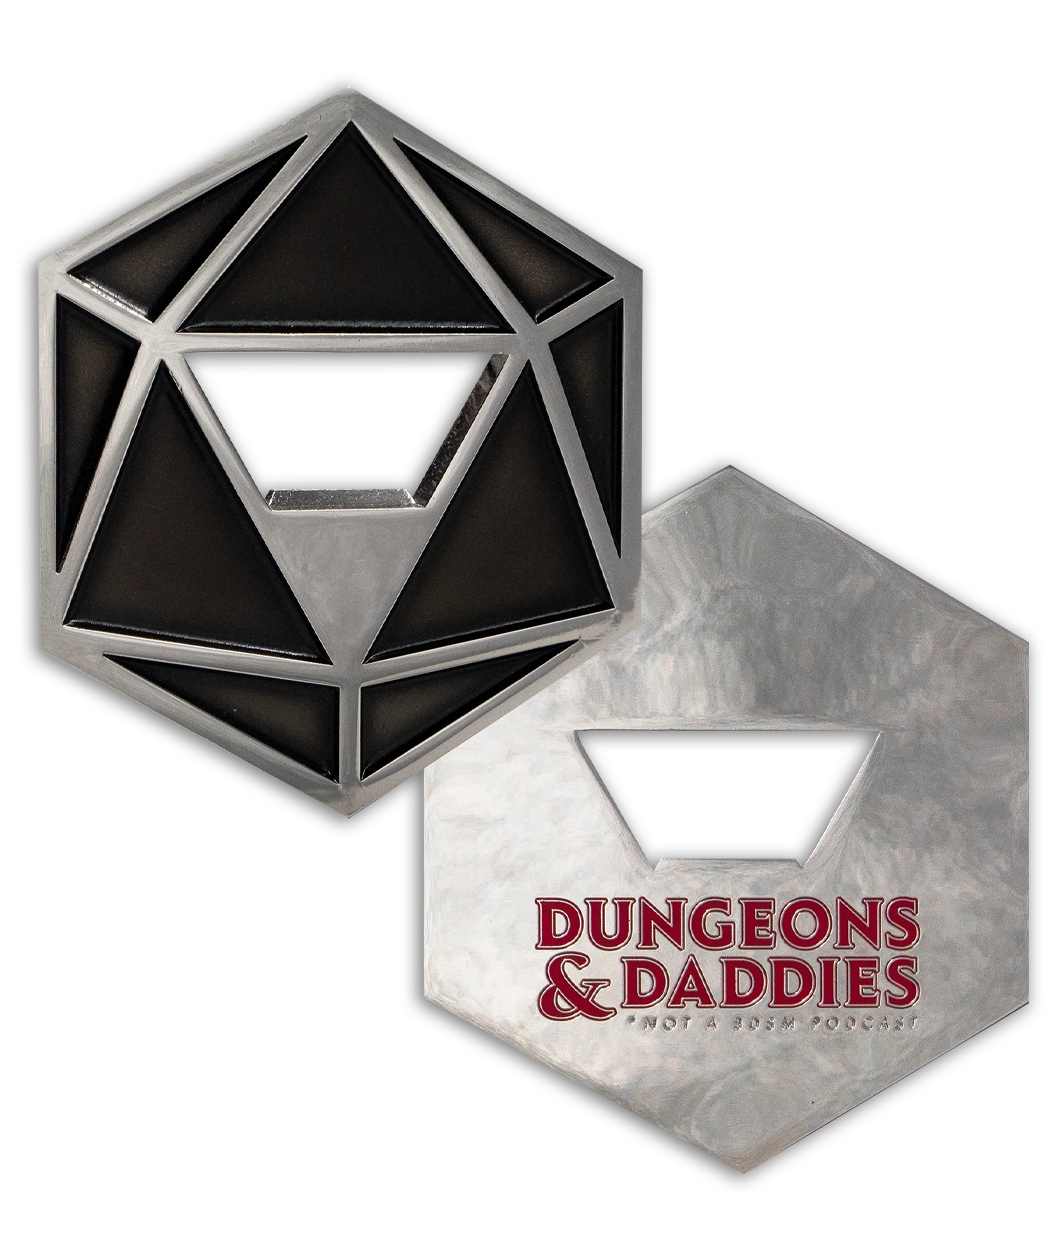 Metal D20 shaped silver bottle opener. Black inlay. Dungeons and Daddies logo printed on the back in dark red.